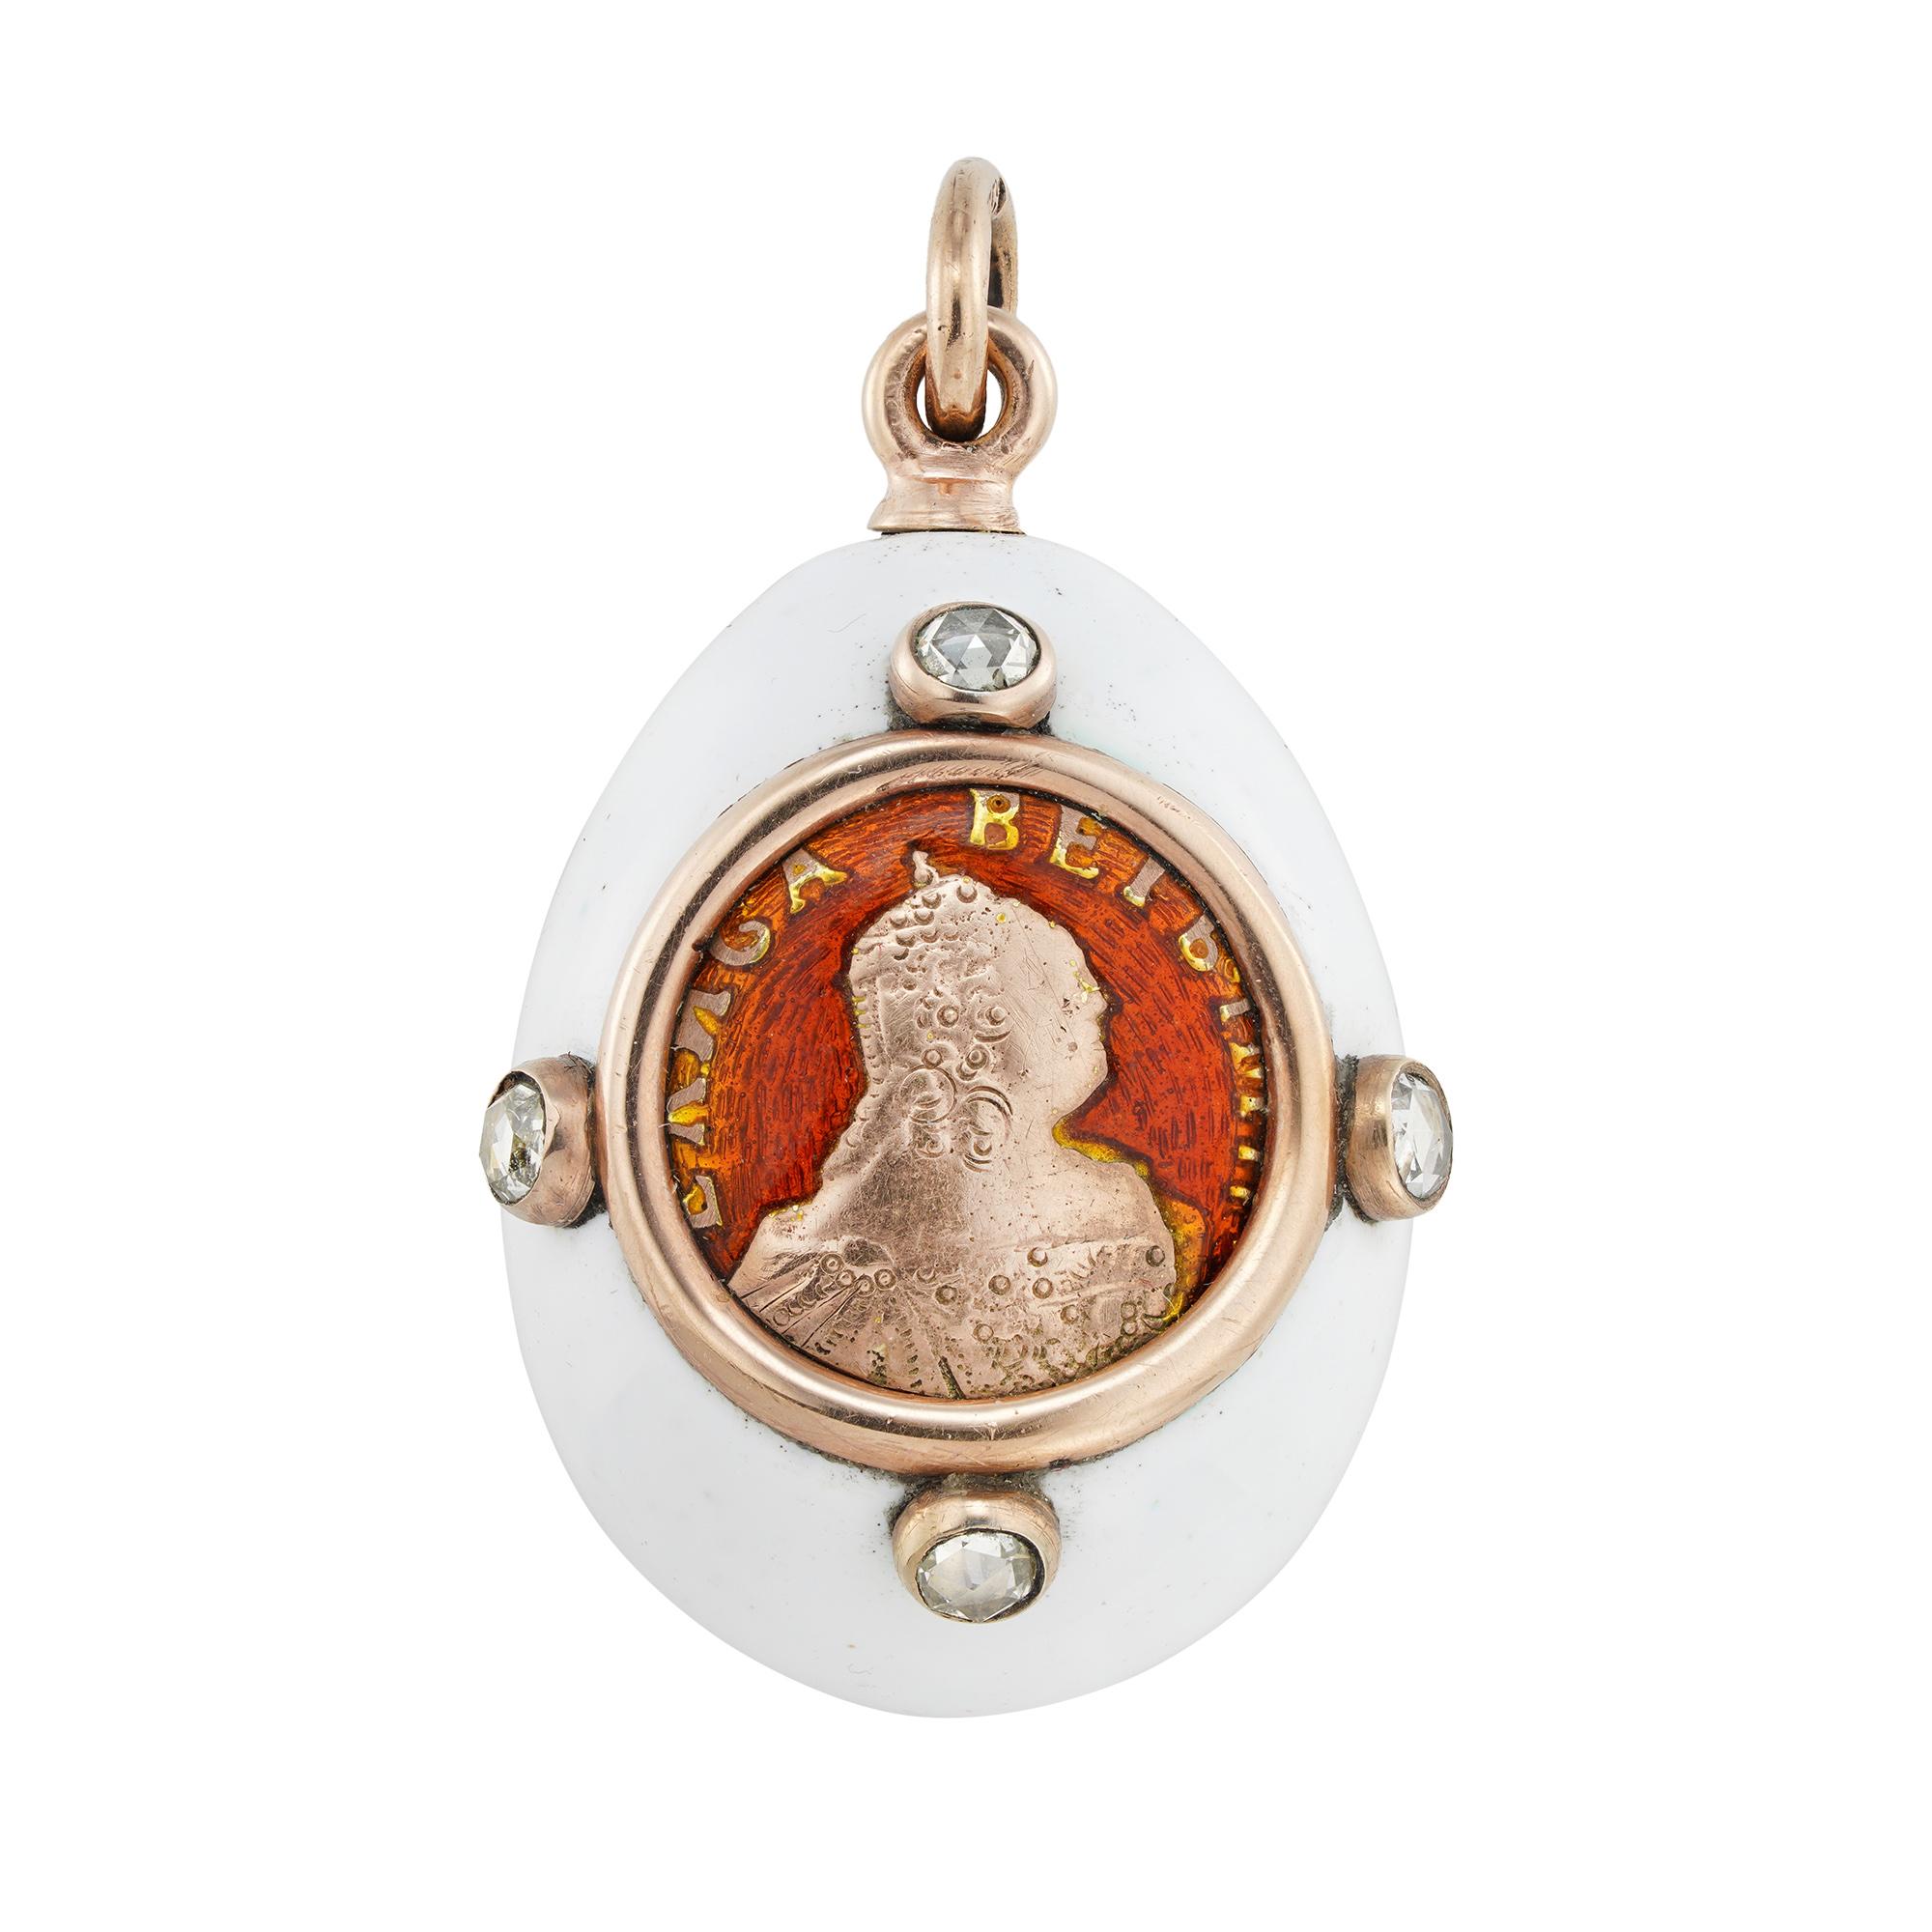 A Fabergé white and red enamelled Easter egg pendant, to the centre a silver-gilt relief of Empress Elizabeth over a red guilloche enamel background, withing a rose gold frame flanked with four rose-cut diamonds, the egg with opaque white enamel and